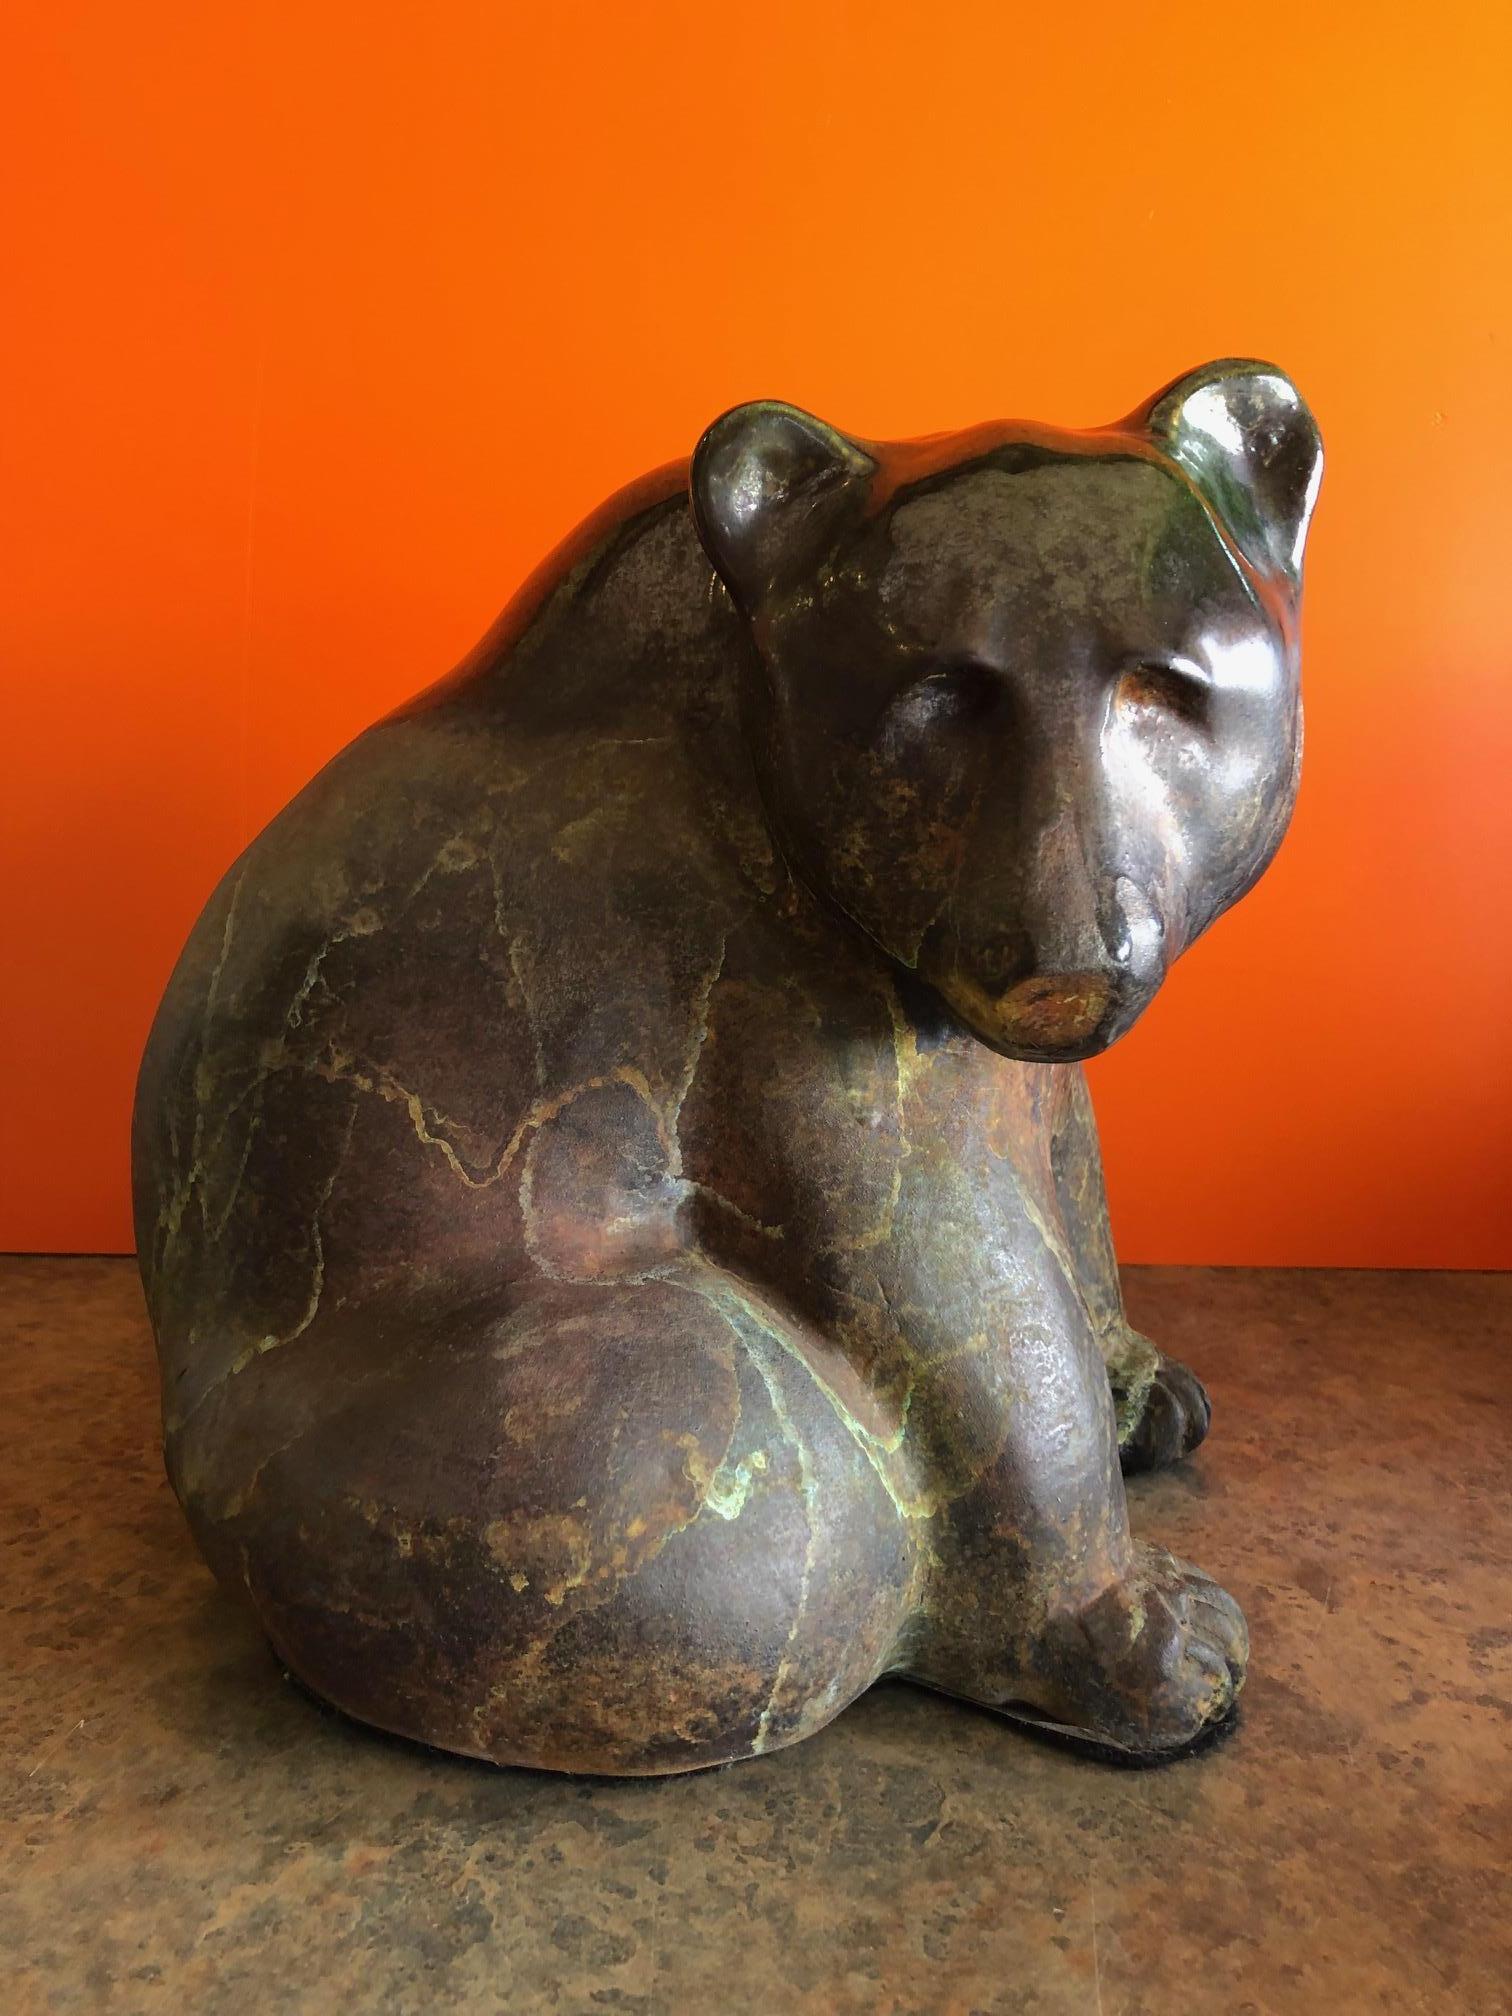 Stunning large raku pottery seated bear by Tony Evans, circa 1970s. The piece is signed and extremely well crafted; ithas wonderful green and brown colors and interesting glaze work.